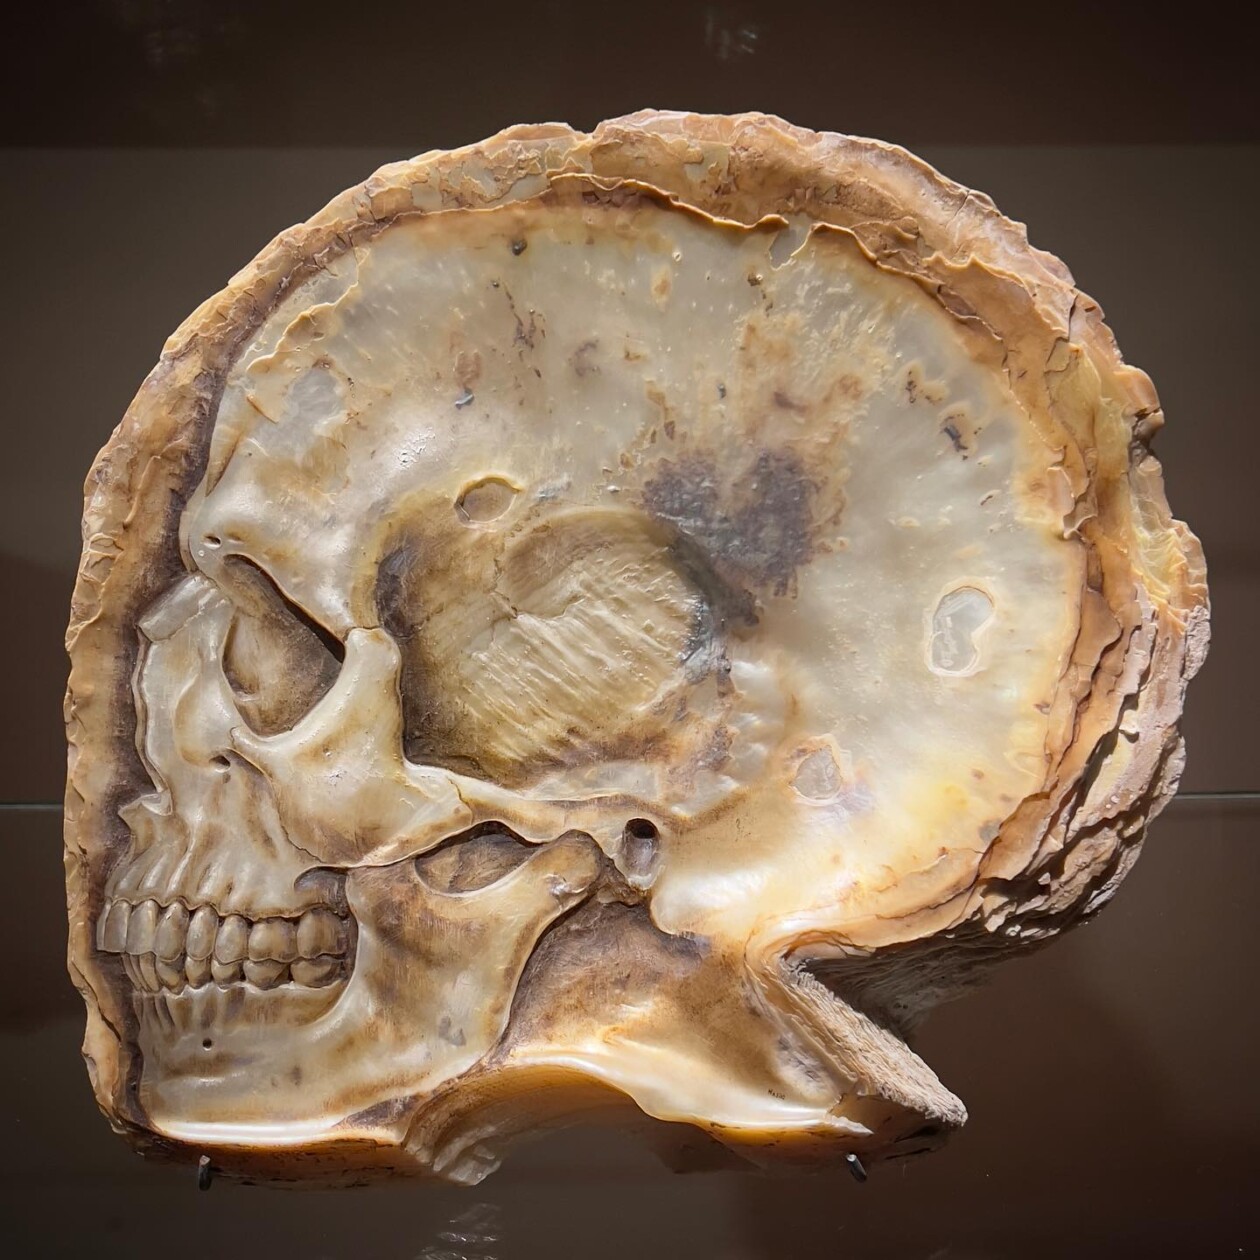 Sculptures Of Anatomical Details Made From Found Coral And Shells By Gregory Halili 19